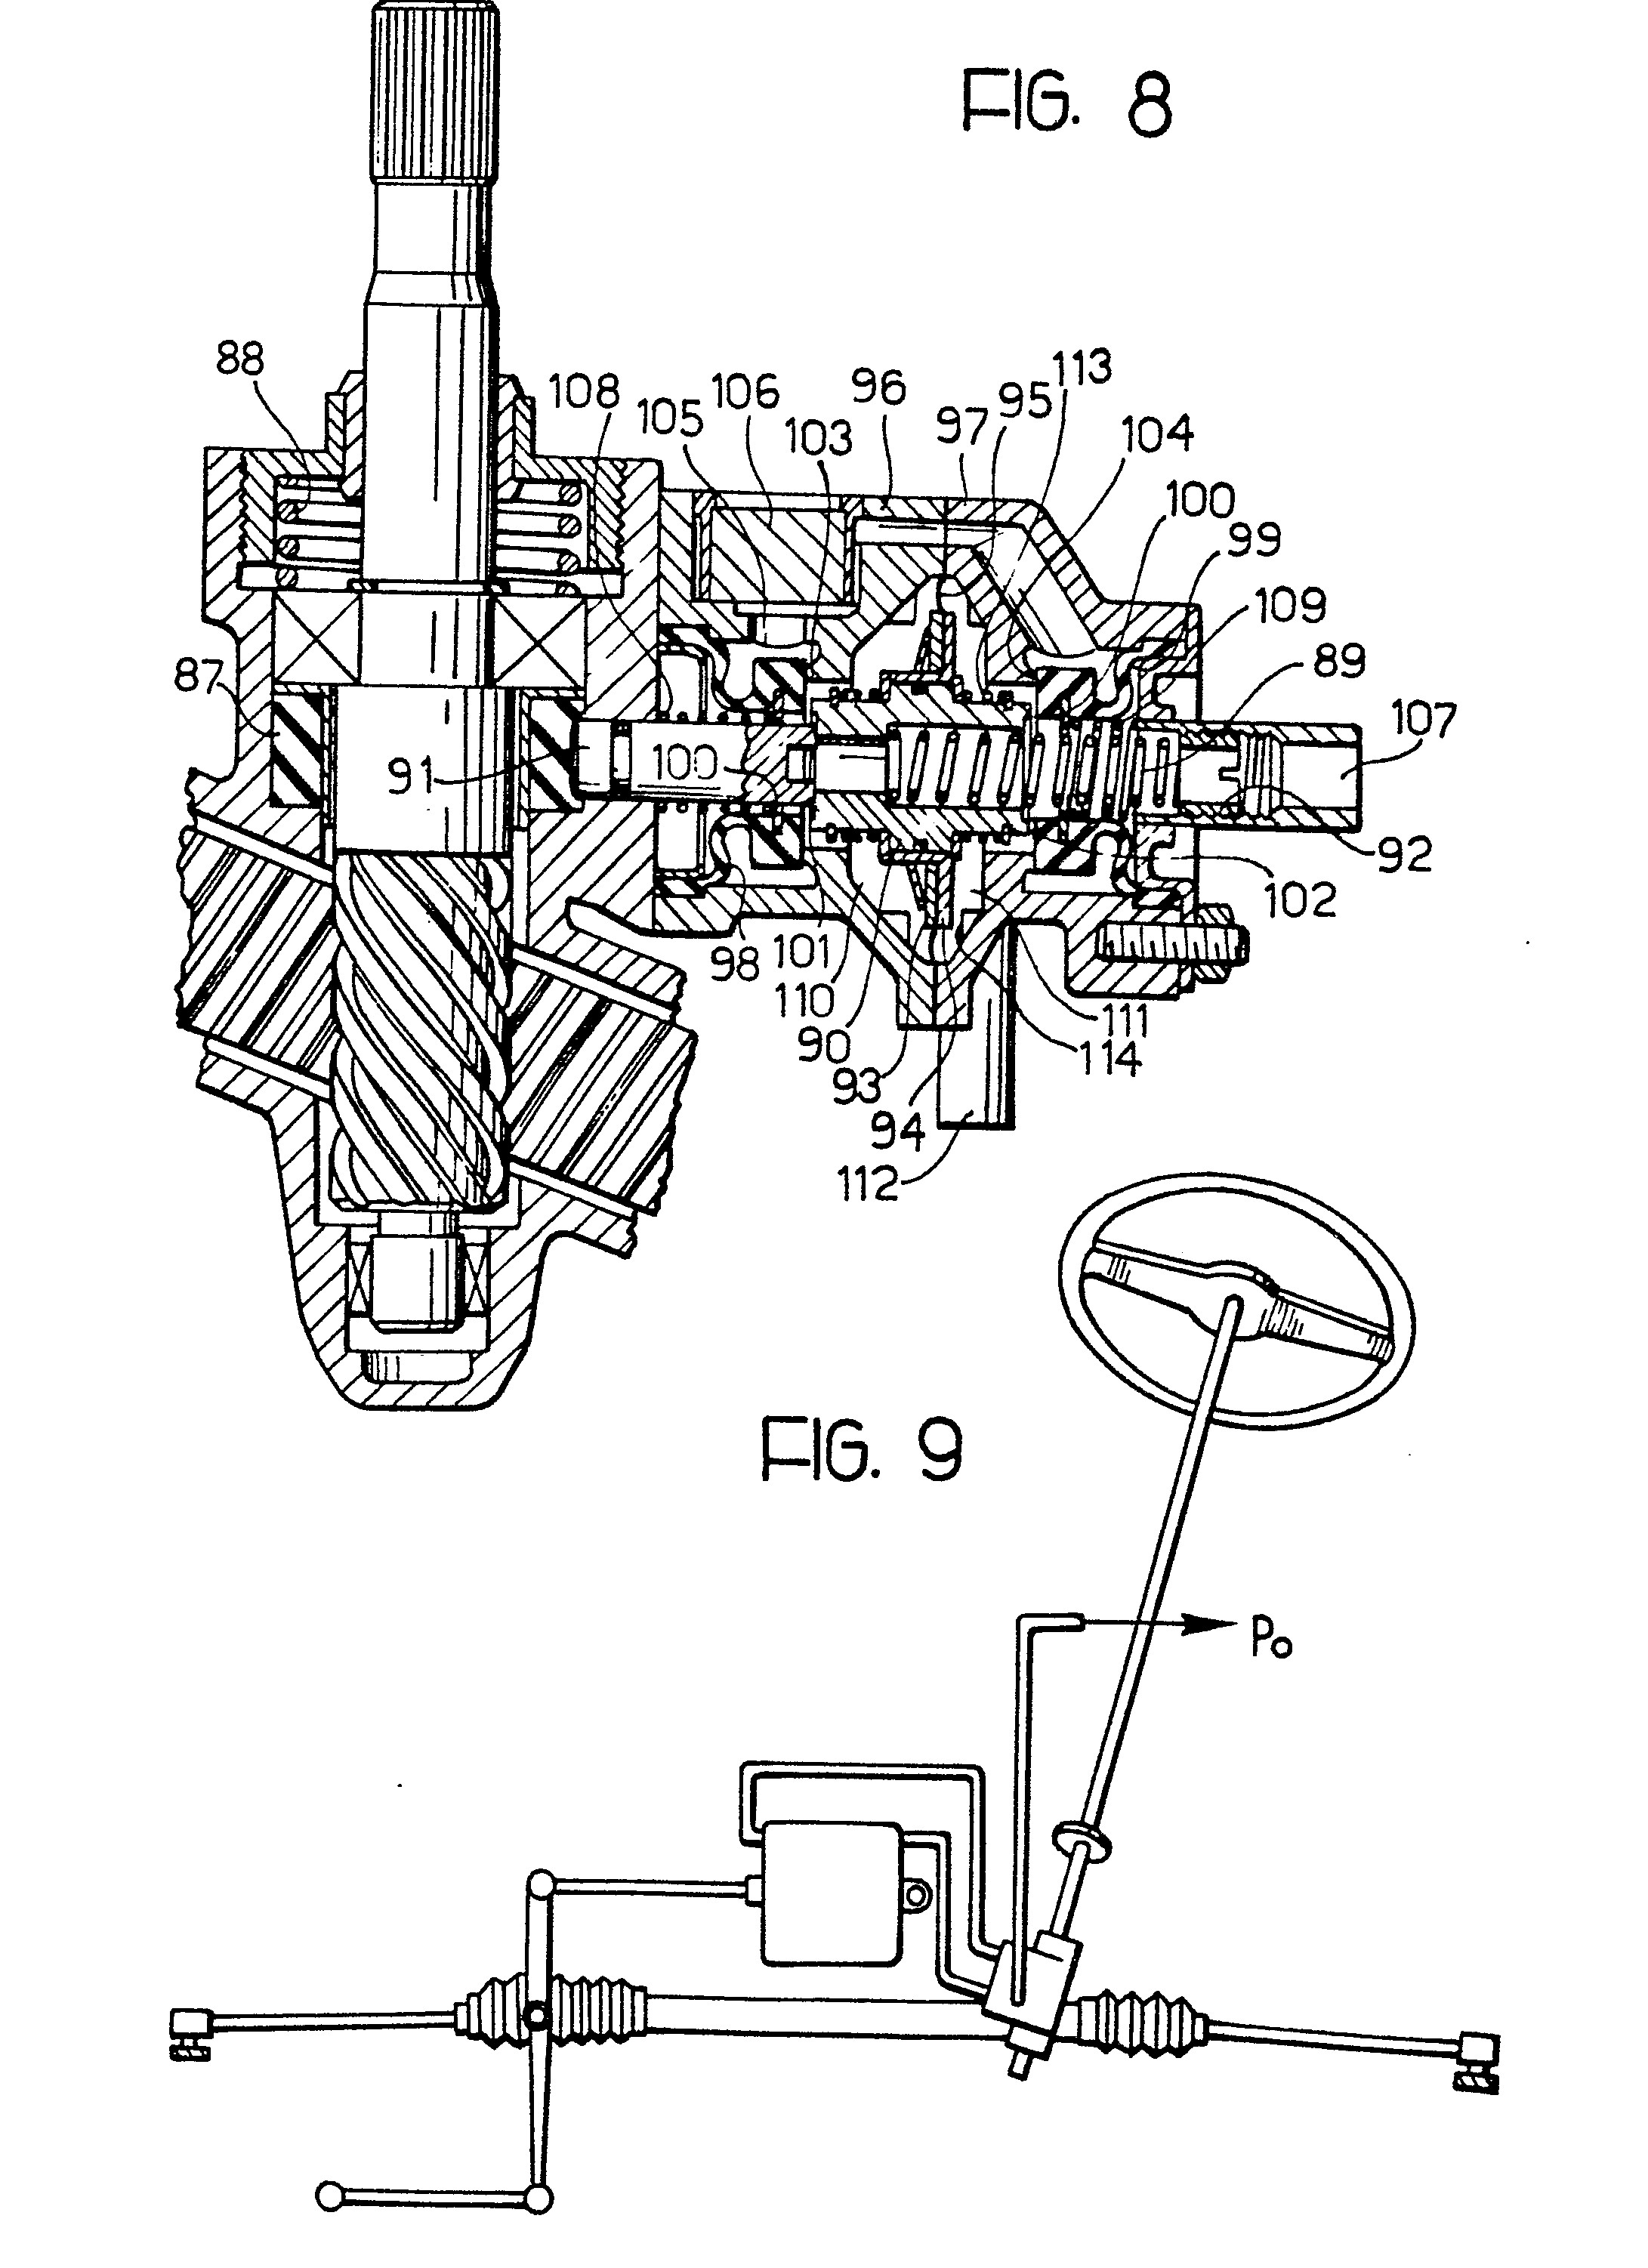 Rack and Pinion Steering System Diagram Power assisted Rack and Pinion Steering Mechanism Patent Of Rack and Pinion Steering System Diagram